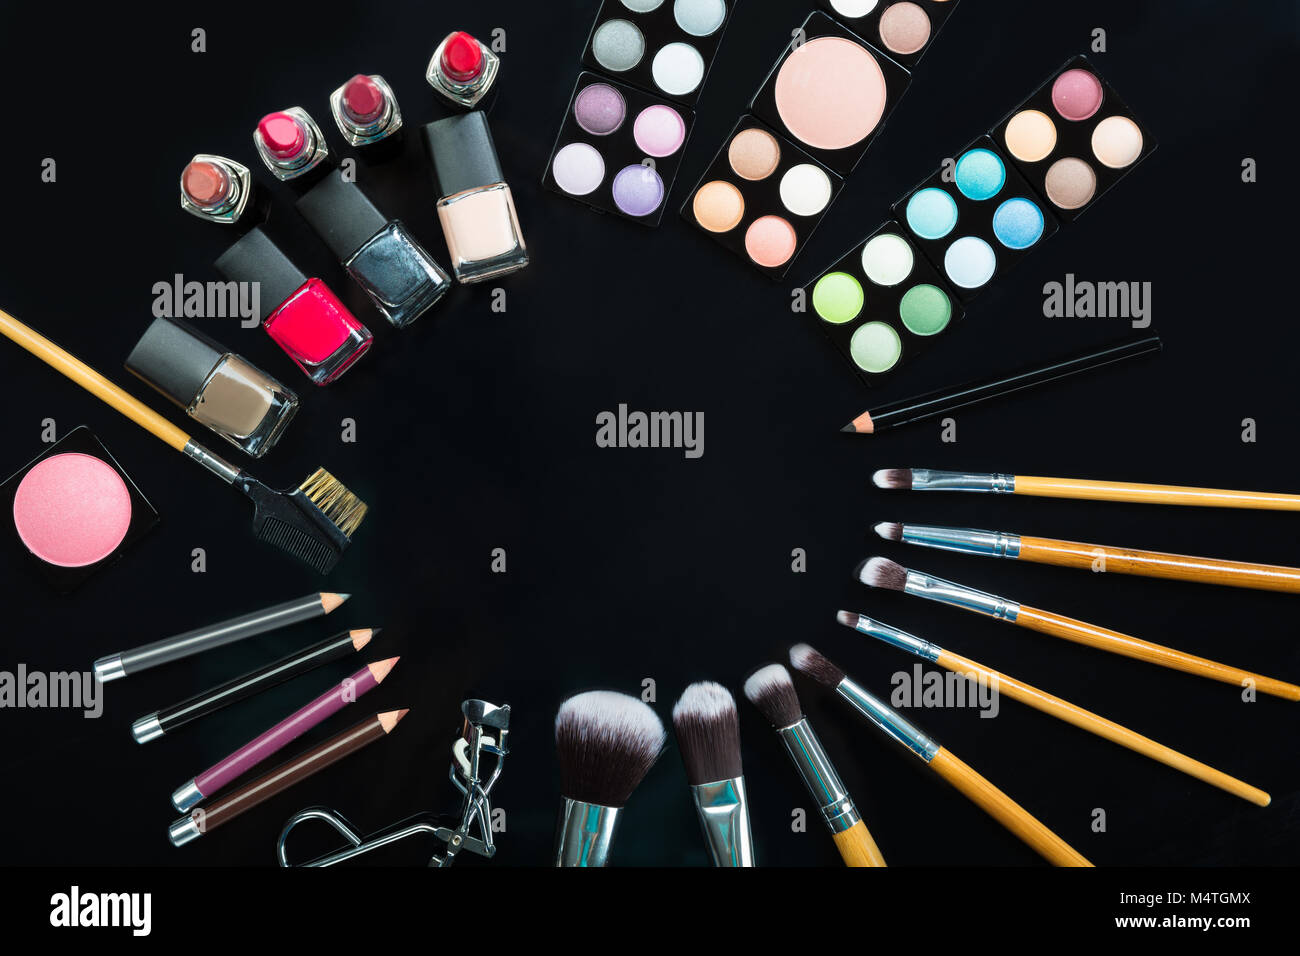 Professional Makeup Brushes And Make-up Products Set On Black Background Stock Photo